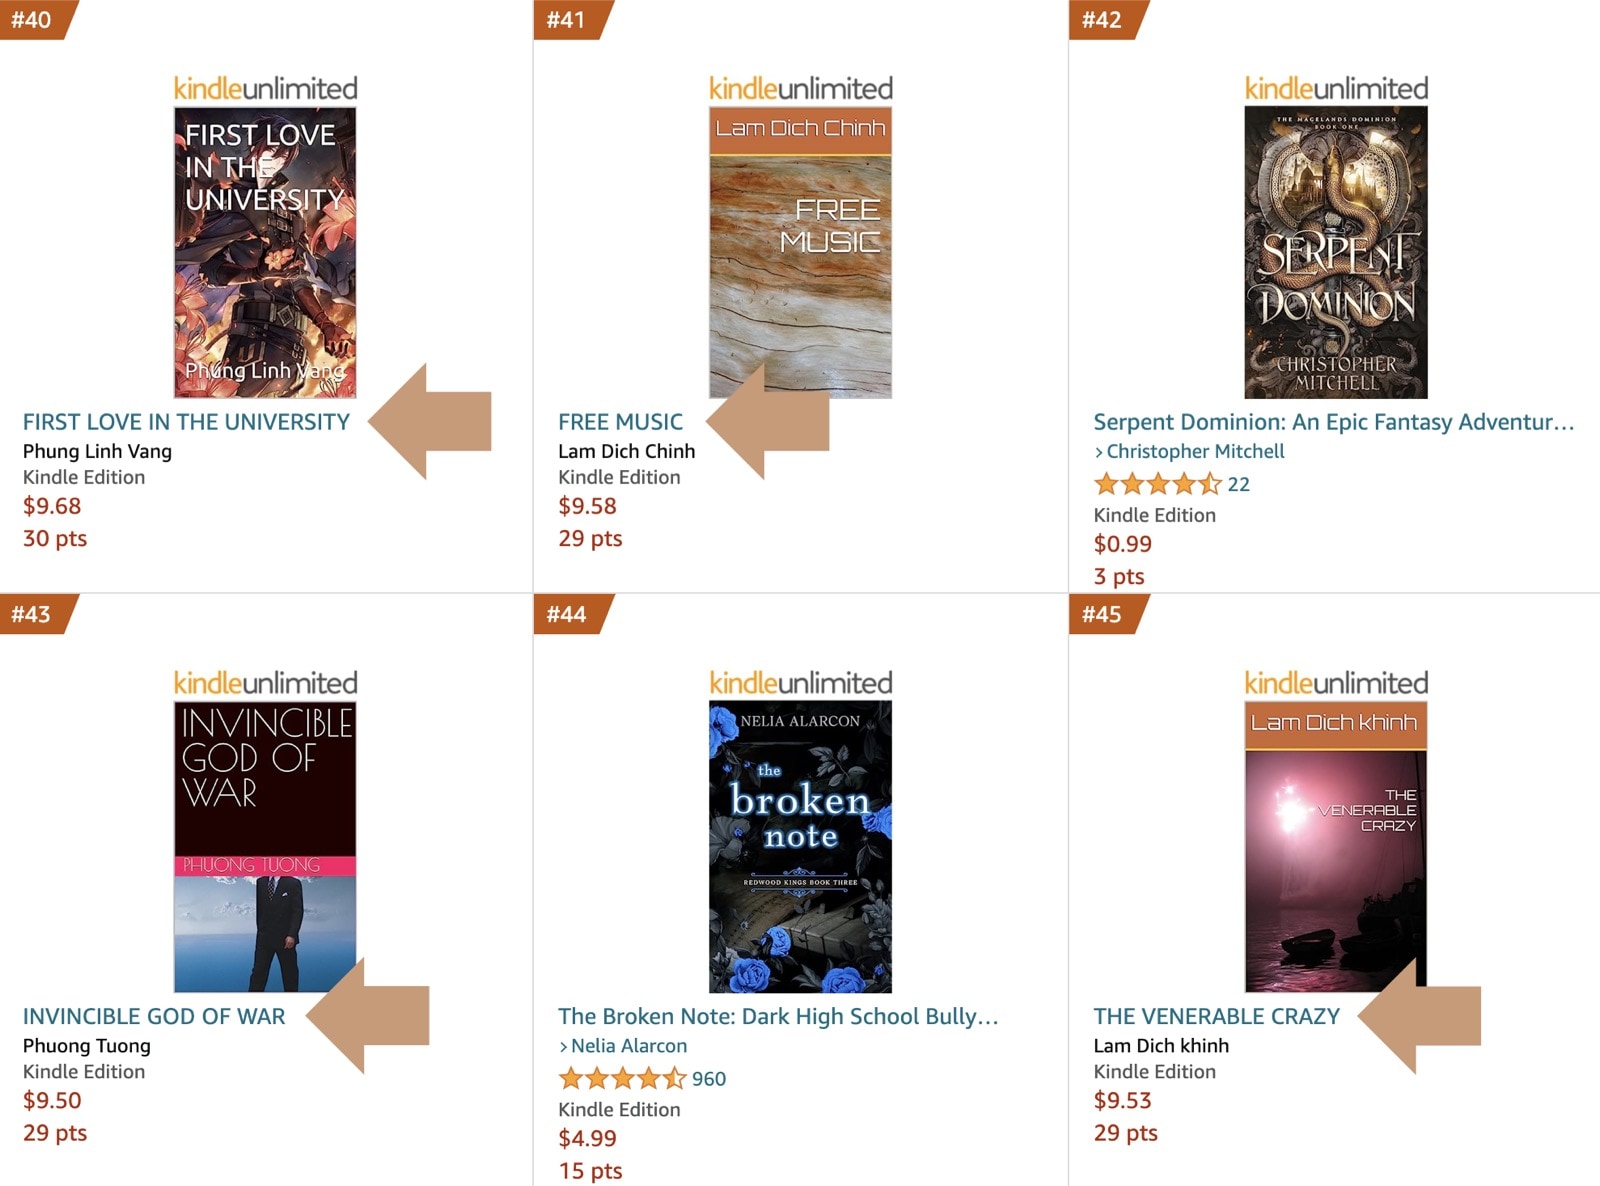 How to spot AI generated Kindle Unlimited books - titles in capital letters